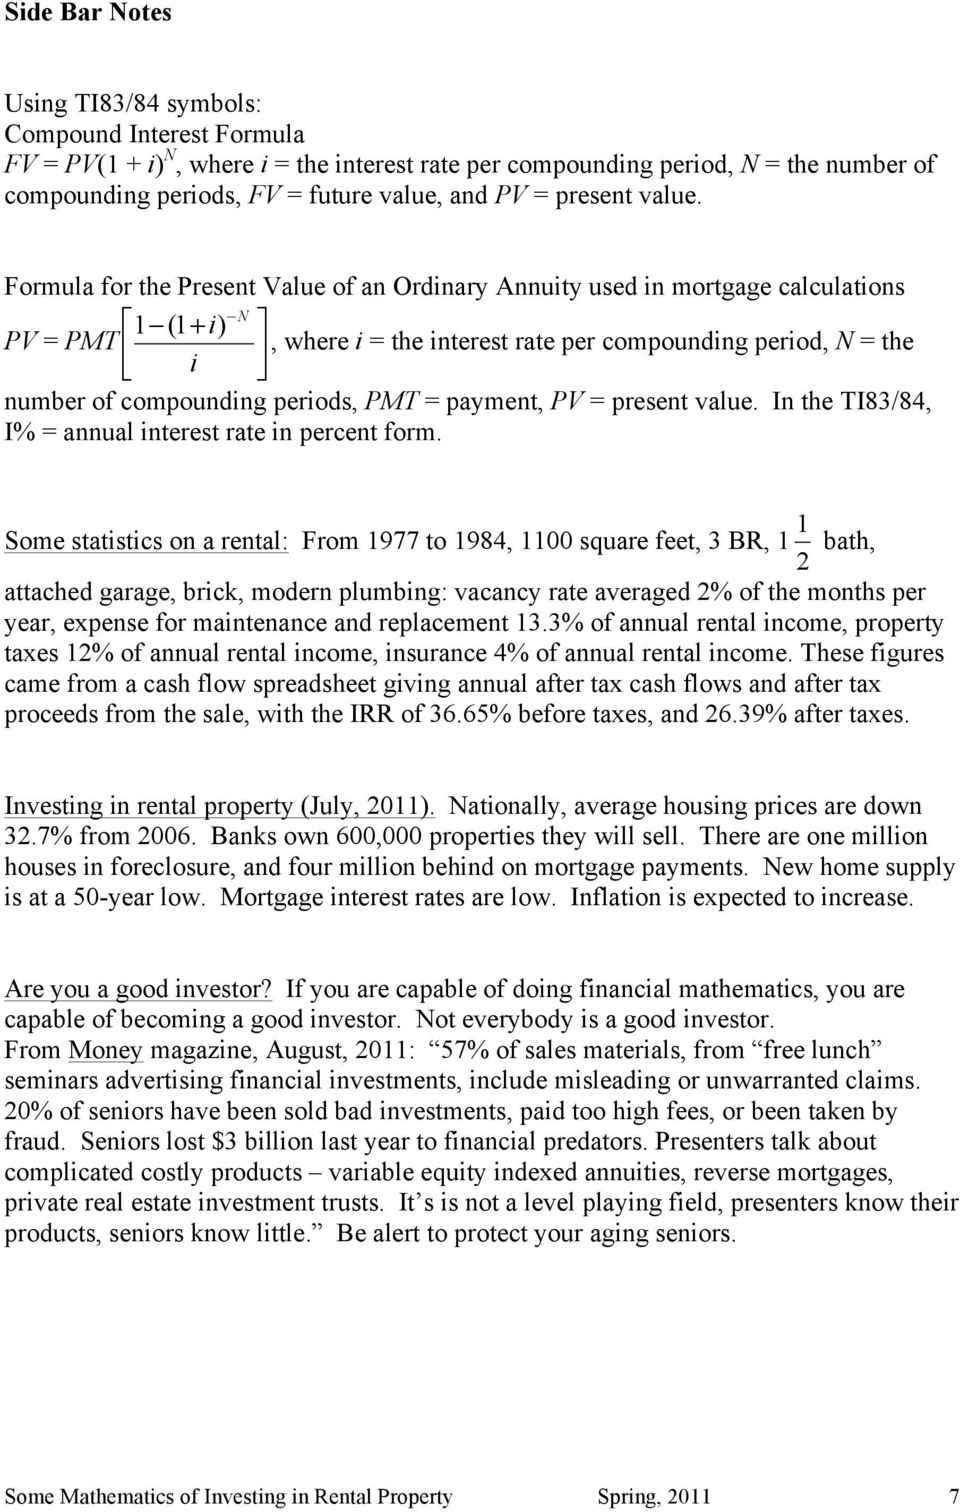 Formula for the Present Value of an Ordinary Annuity used in mortgage calculations PV = PMT 1 (1 ) + i N, where i = the interest rate per compounding period, N = the i number of compounding periods,